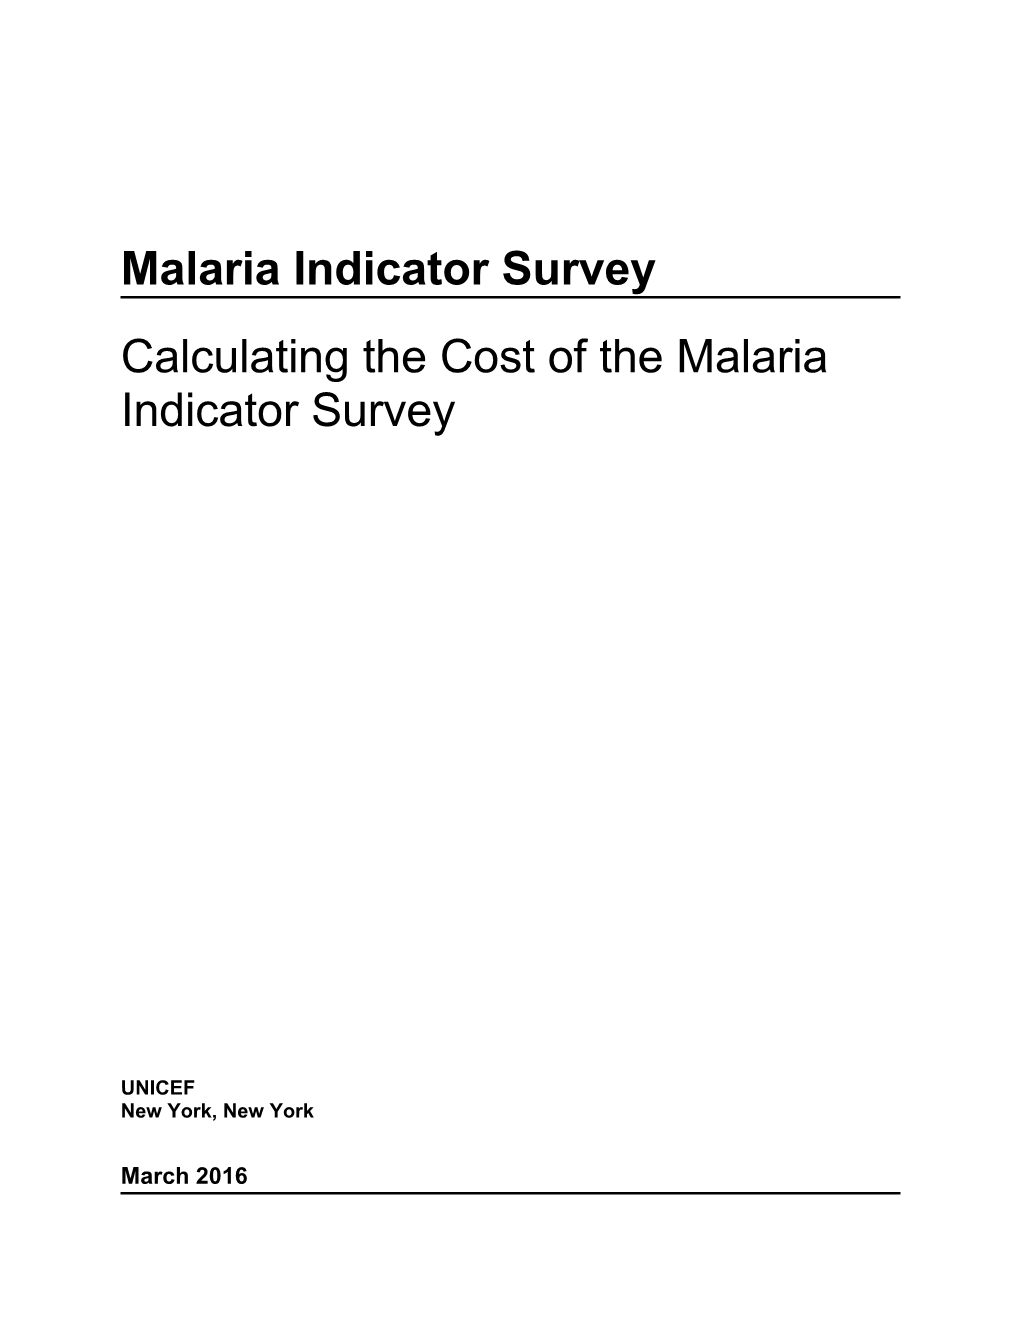 Calculating the Cost of the Malaria Indicator Survey